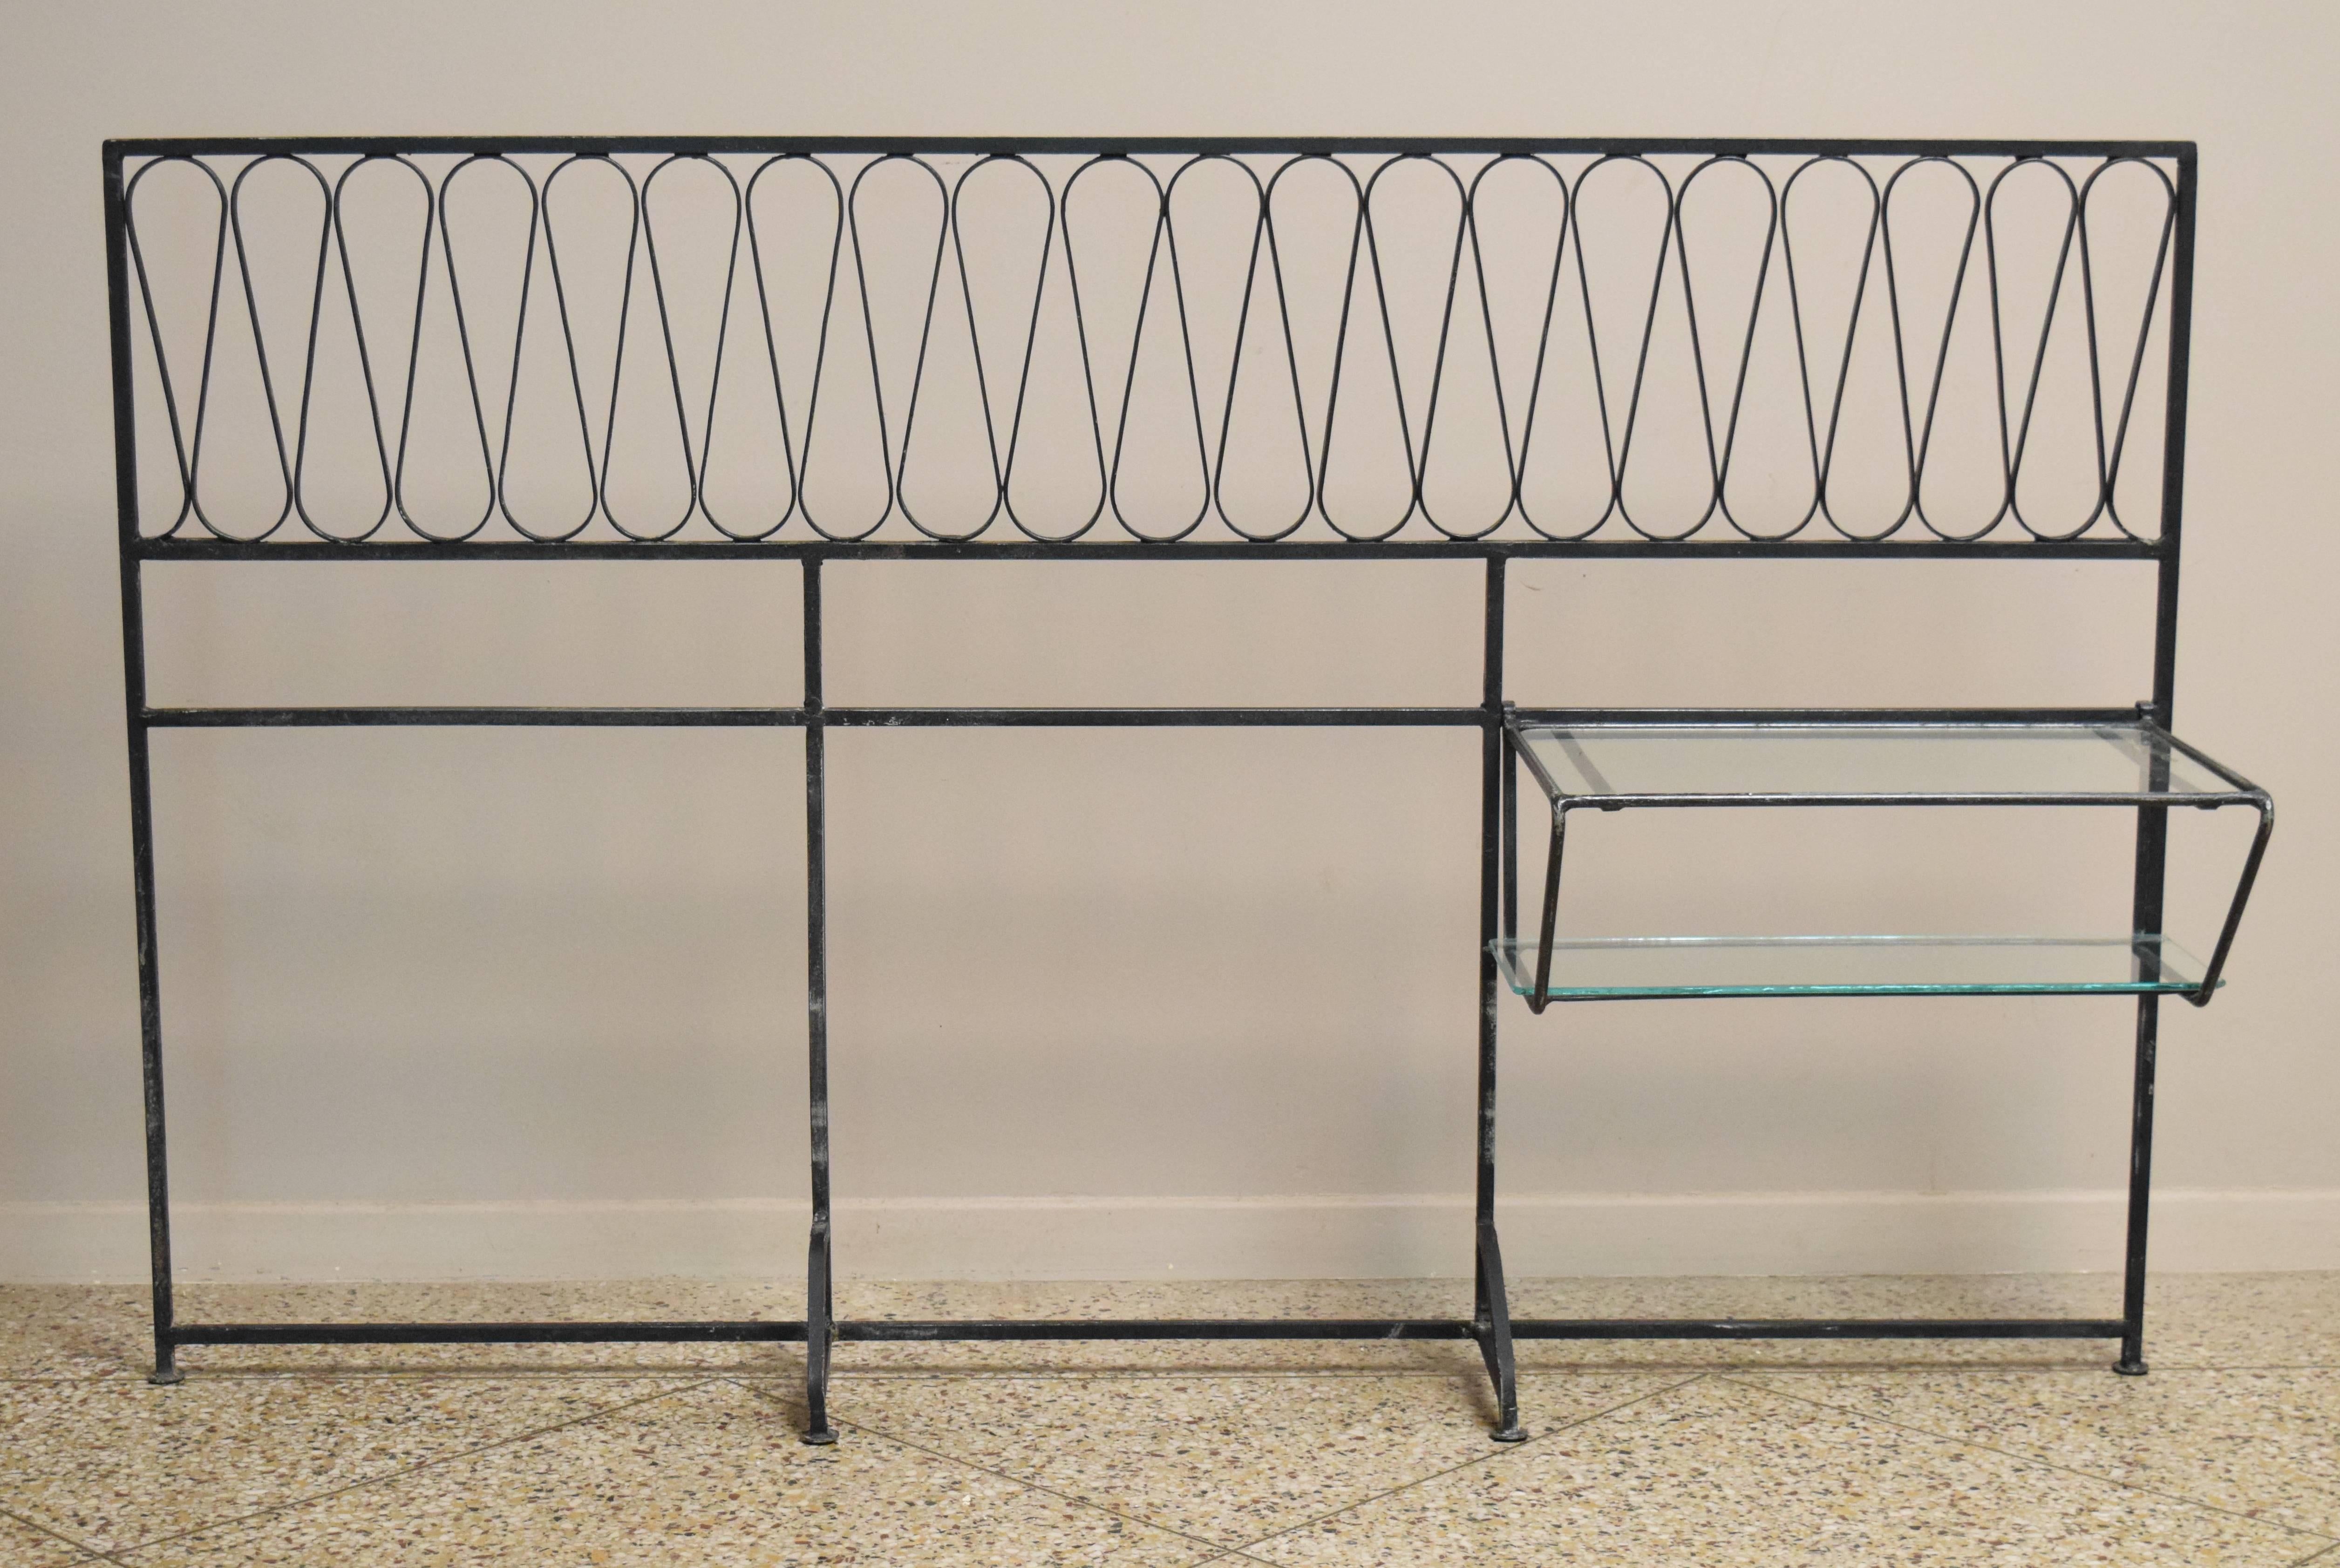 Store closing-- last day is 7/31. Offers welcome! Wrought iron headboard sized to fit either a queen bed or a twin bed if used alongside detachable, two-tiered shelving piece as shown in vintage Salterini ads. Other sizes also available.

Please